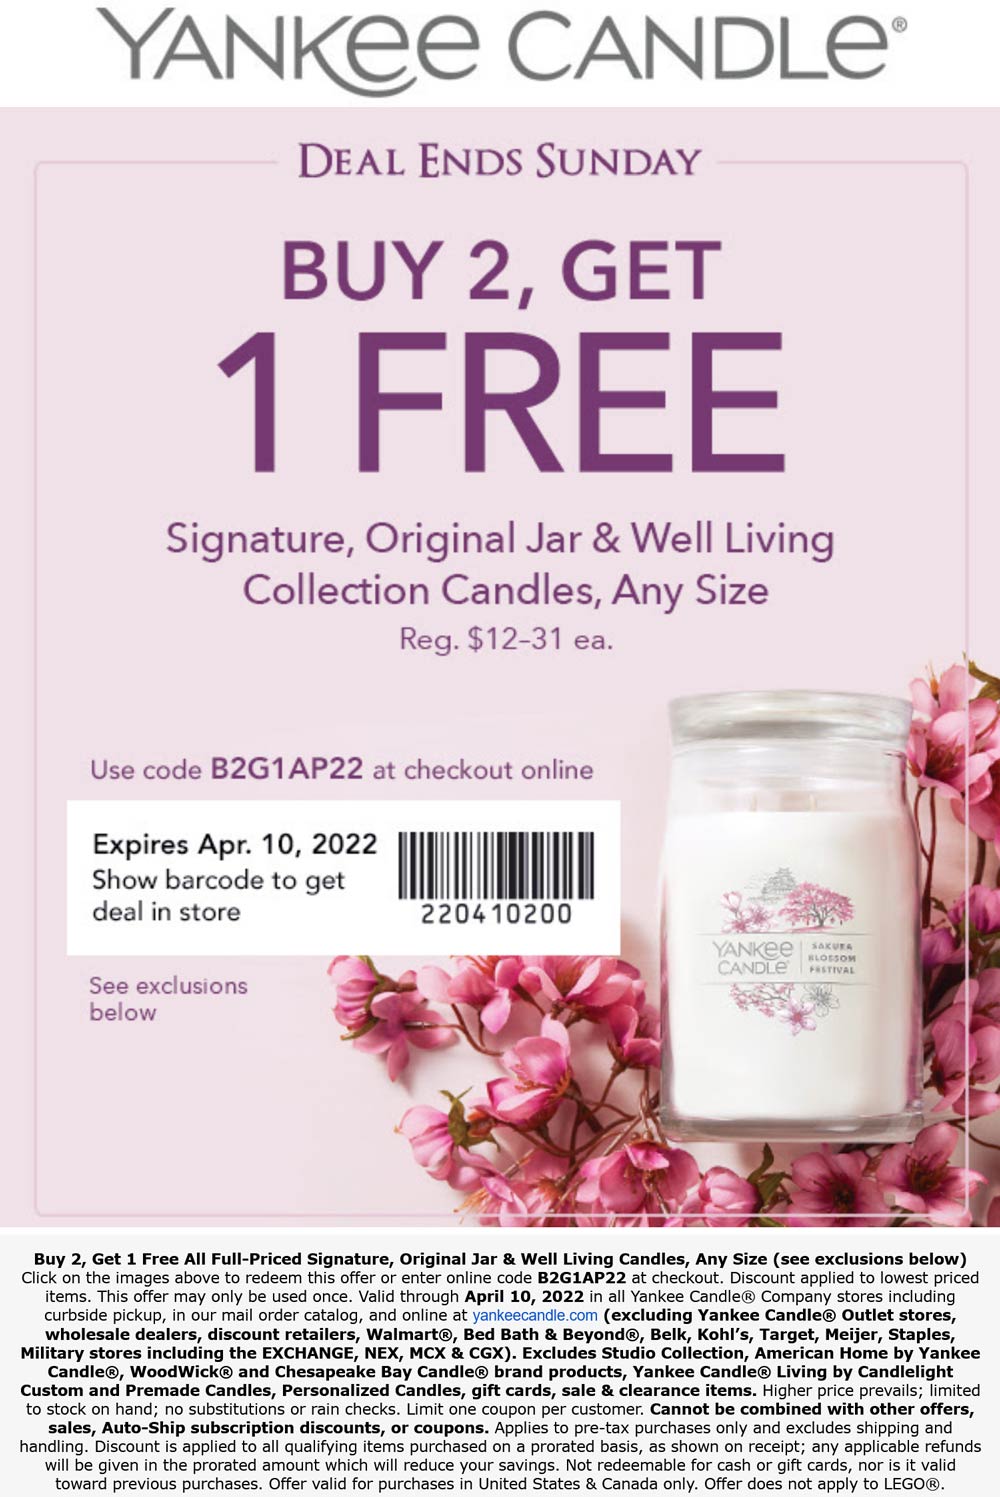 Yankee Candle coupons & promo code for [November 2022]